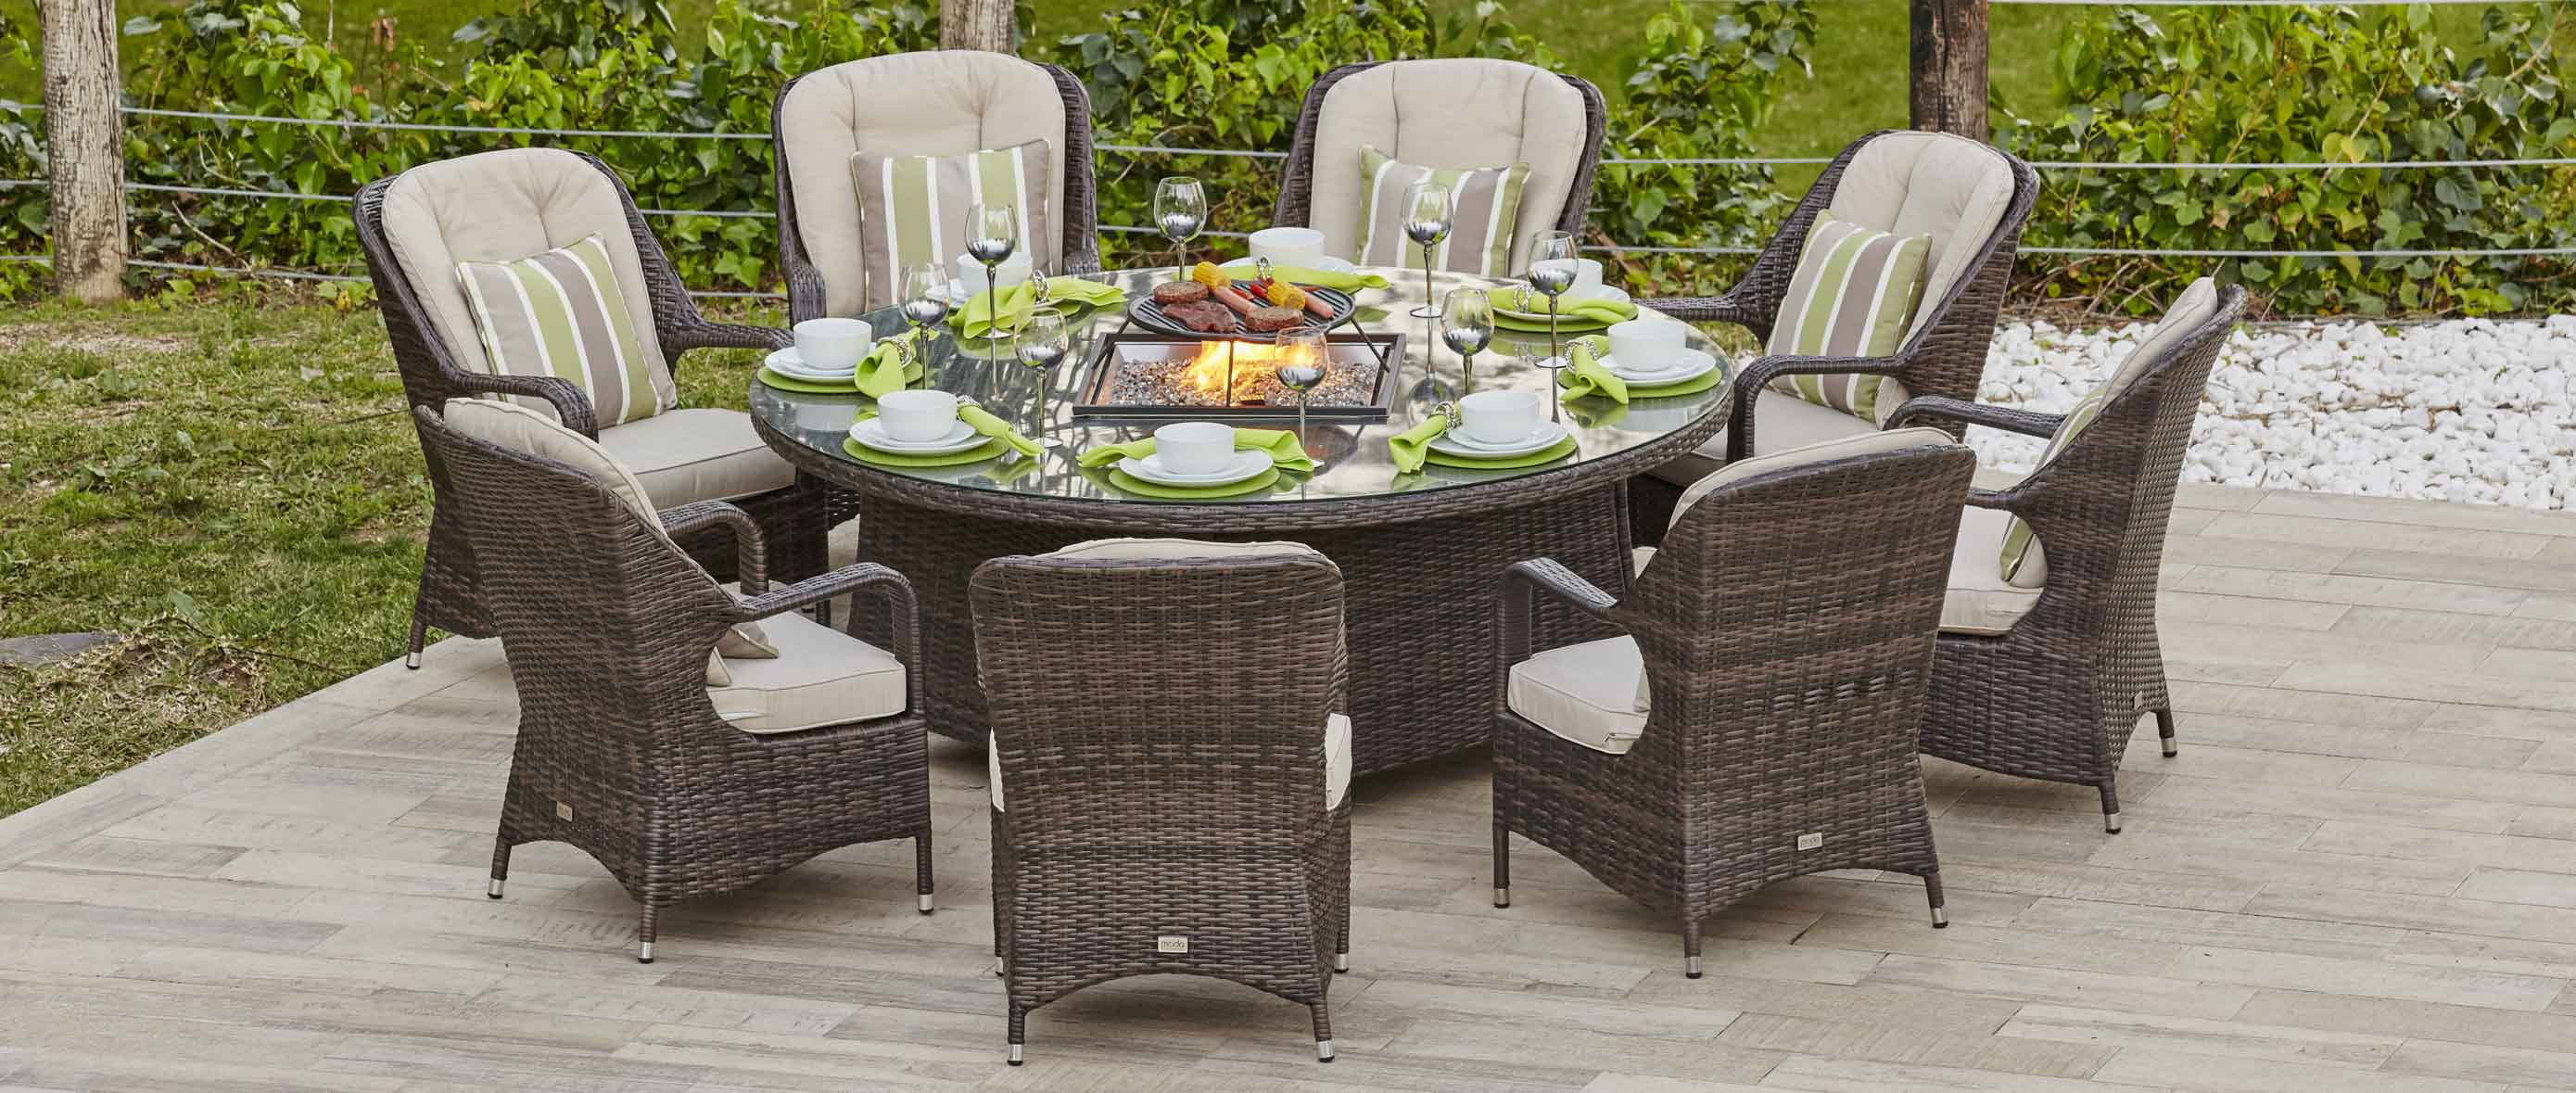 Turnbury Outdoor 9 Piece Patio Wicker Gas Fire Pit Set Round Table With Arm Chairs by Direct Wicker